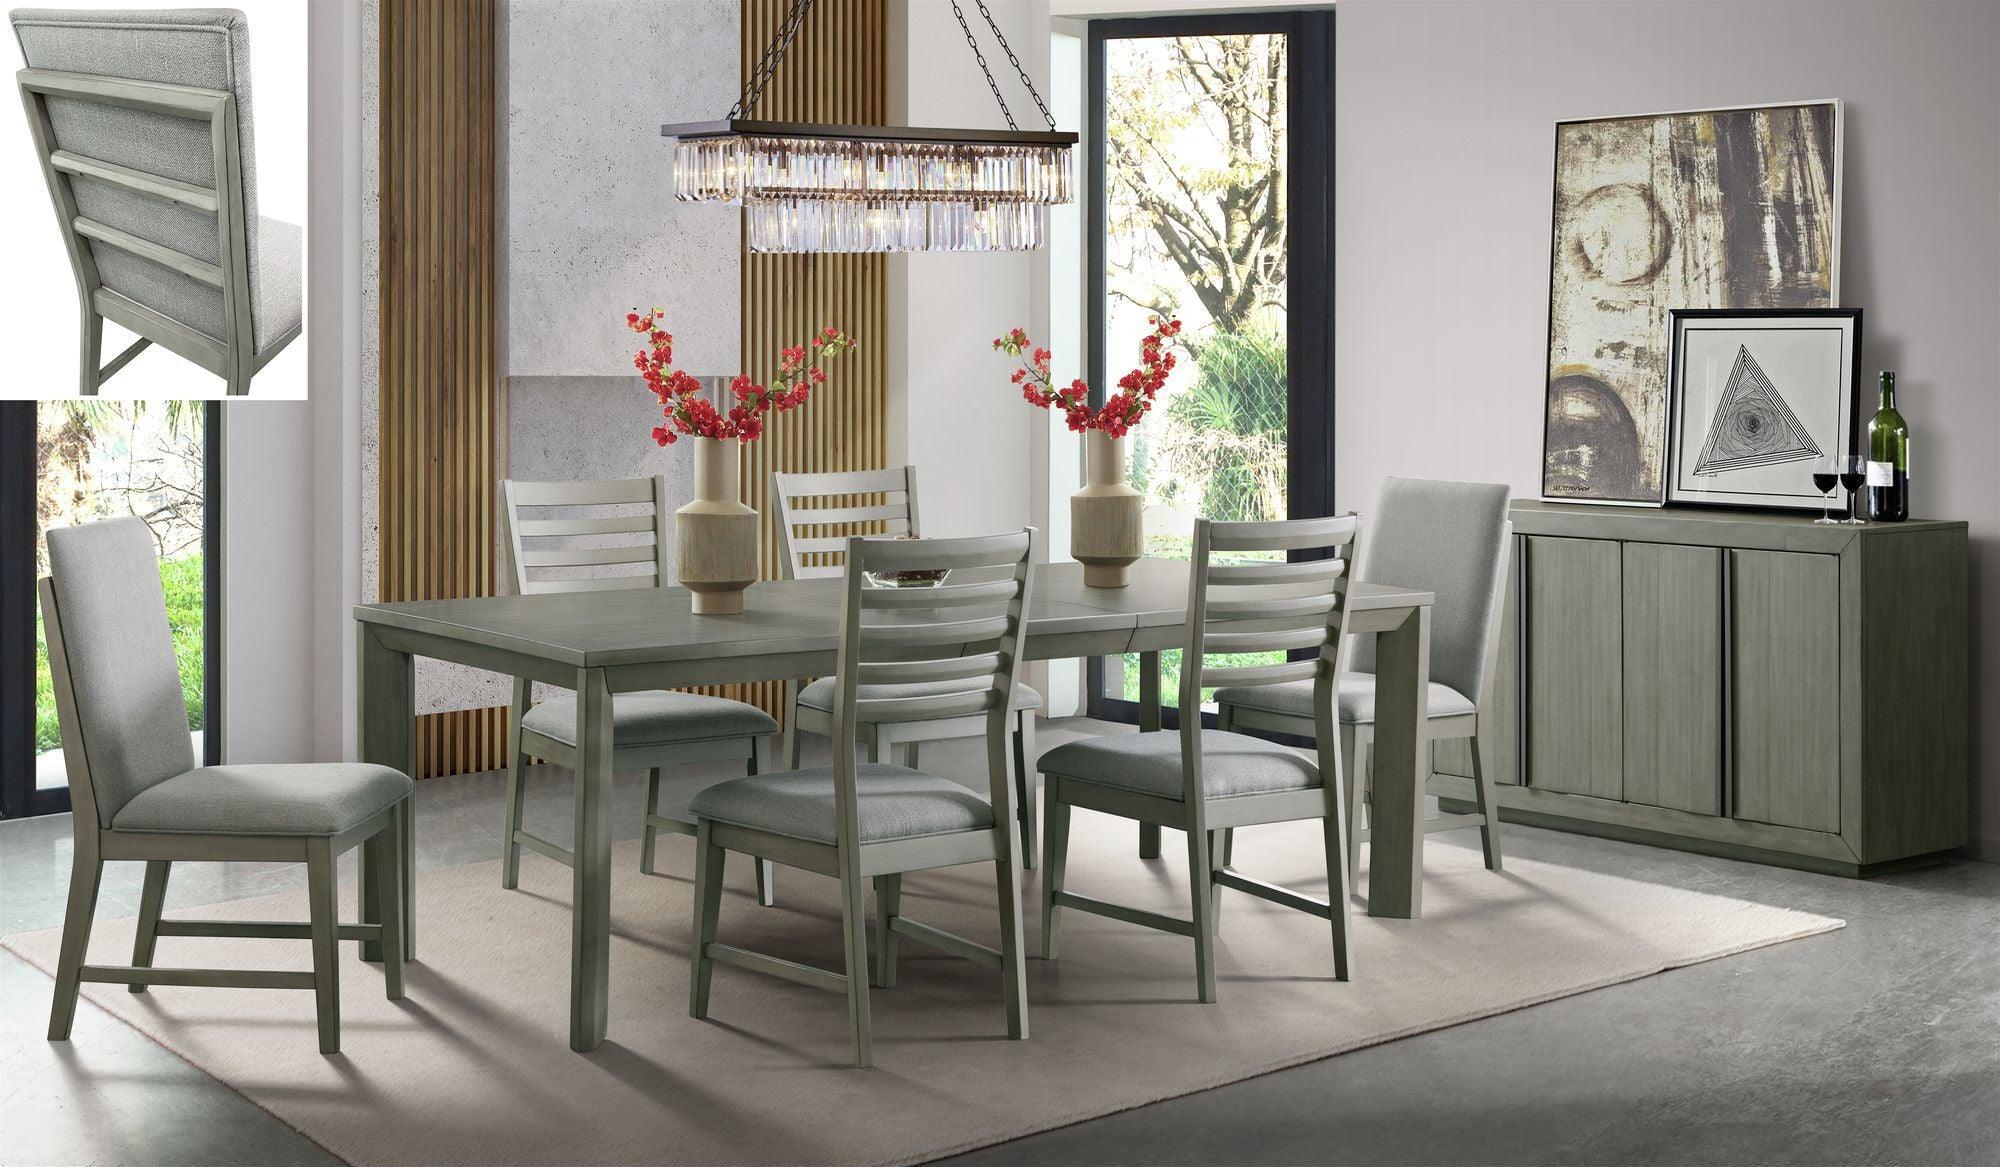 Elements Dining Tables - Cosmo Dining Table in Grey